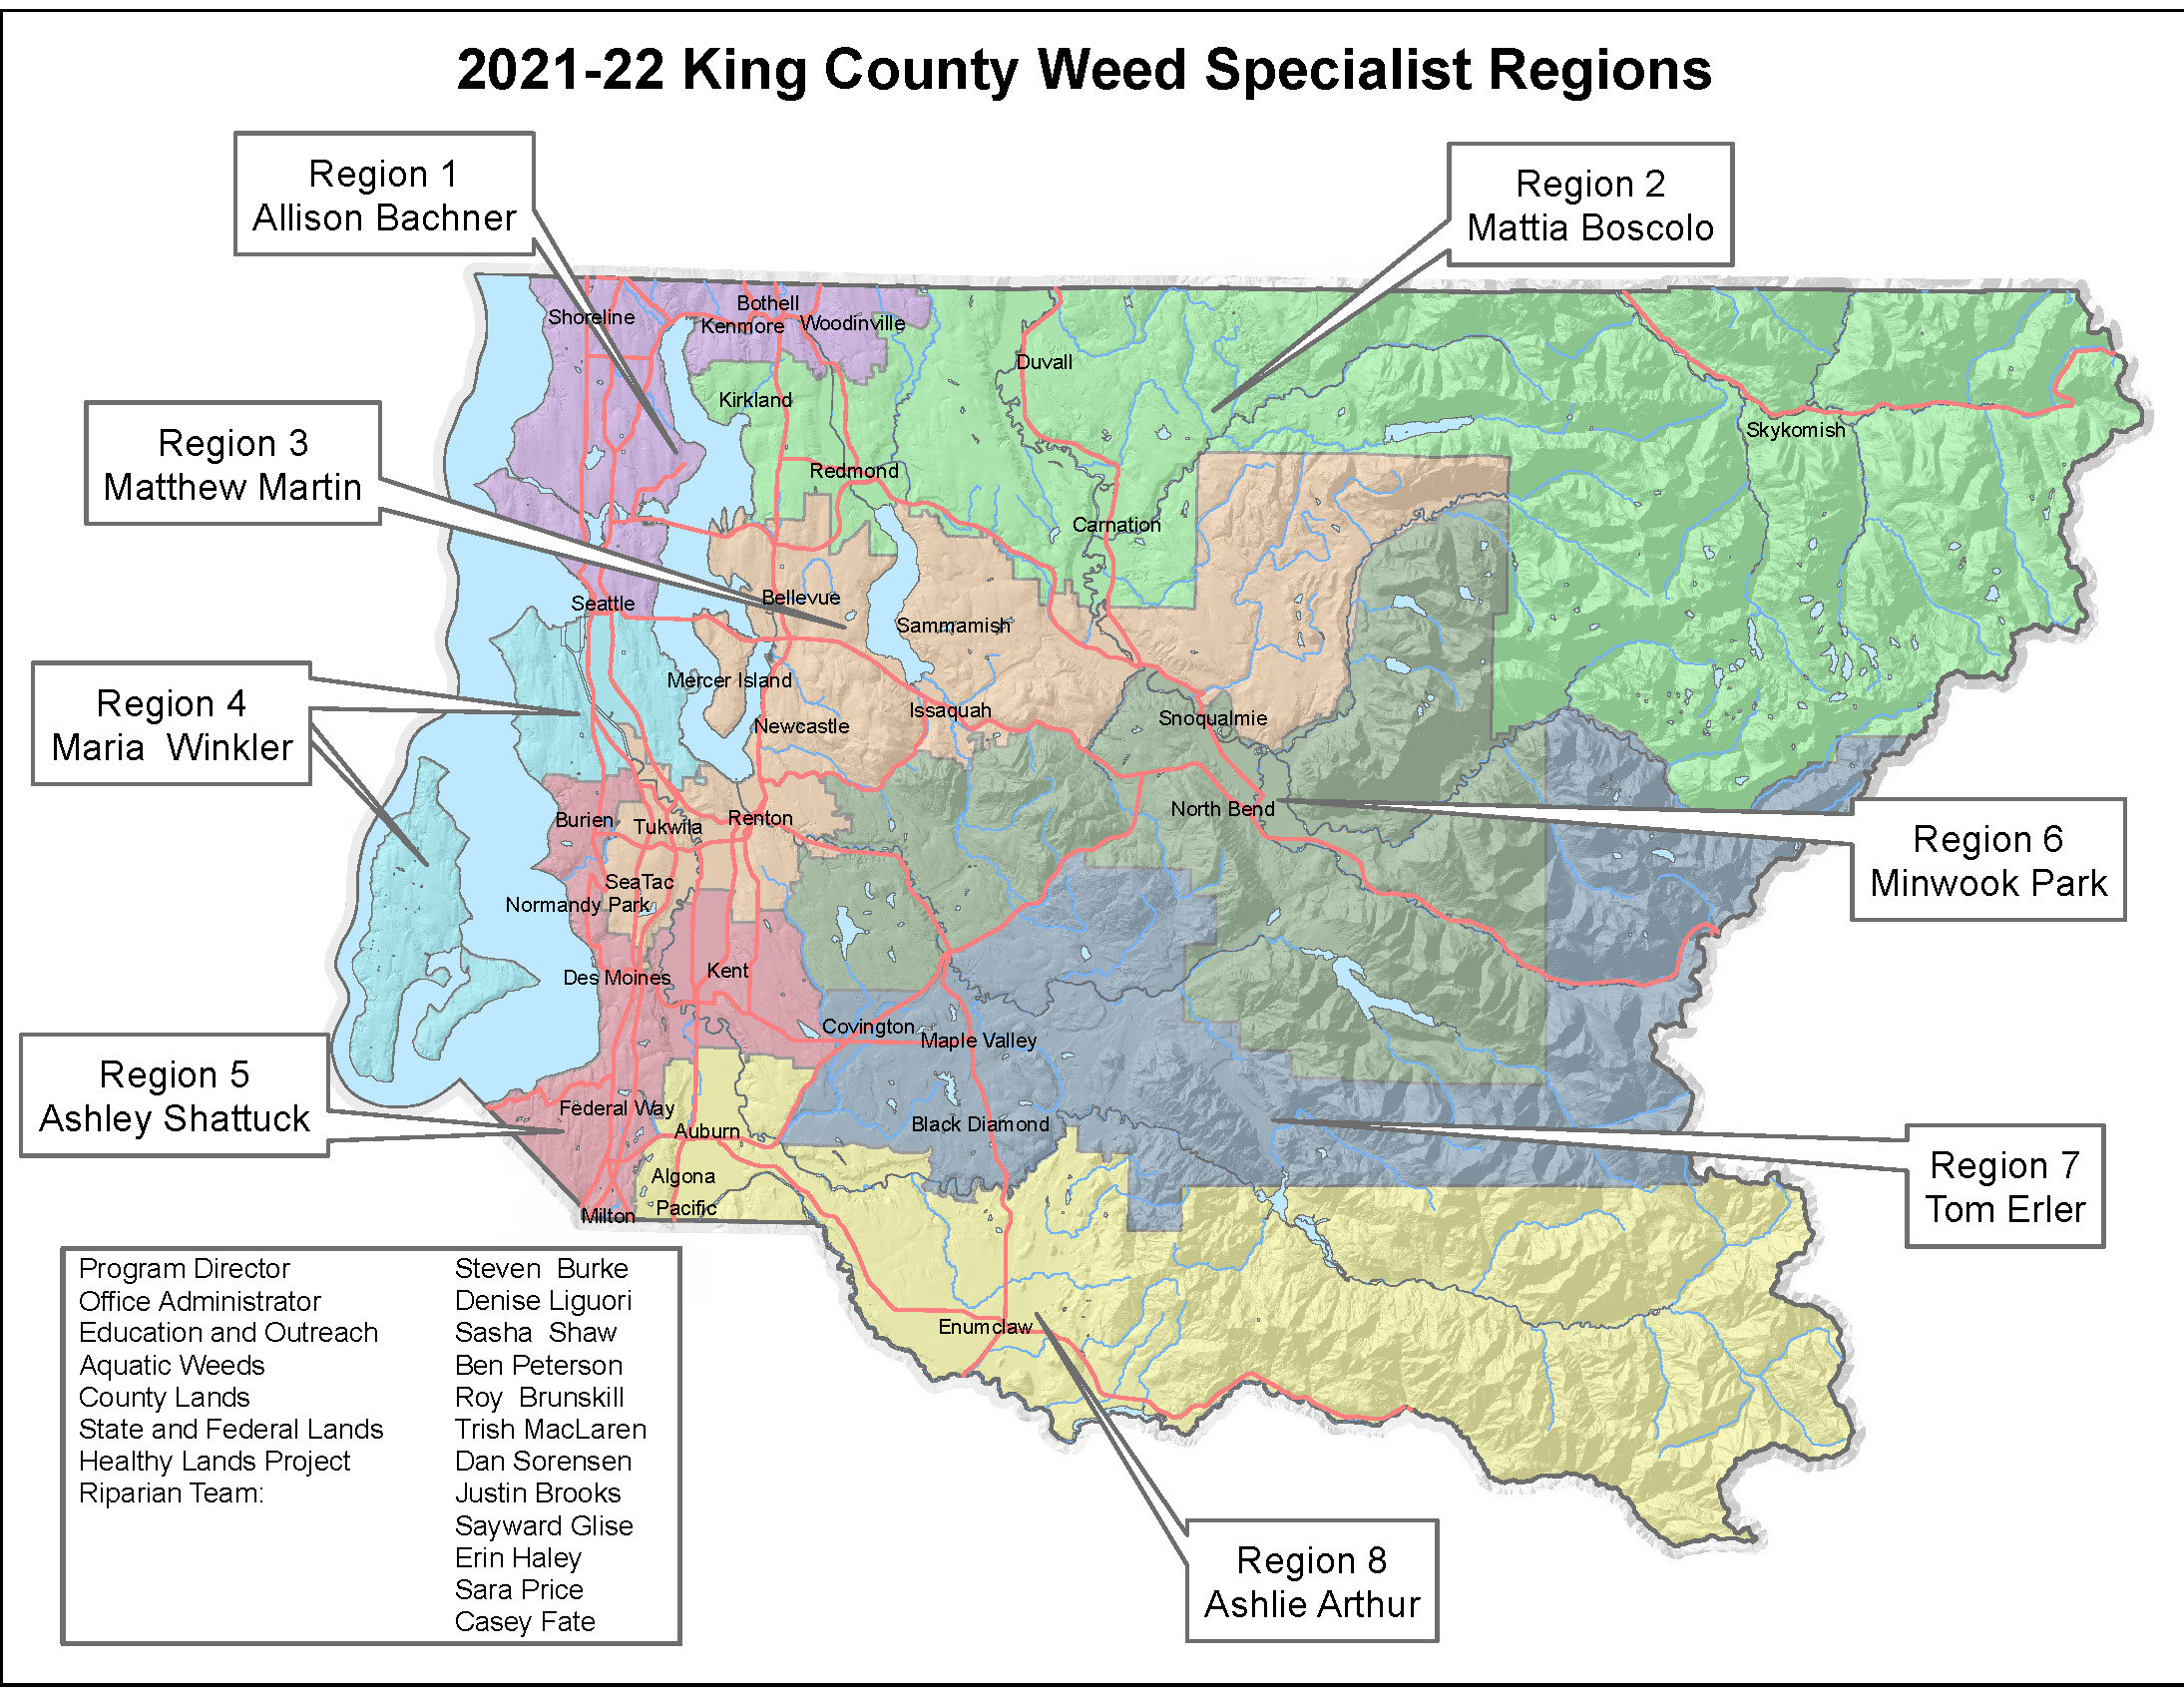 King County Noxious Weed Program Region Map for Noxious Weed Specialists